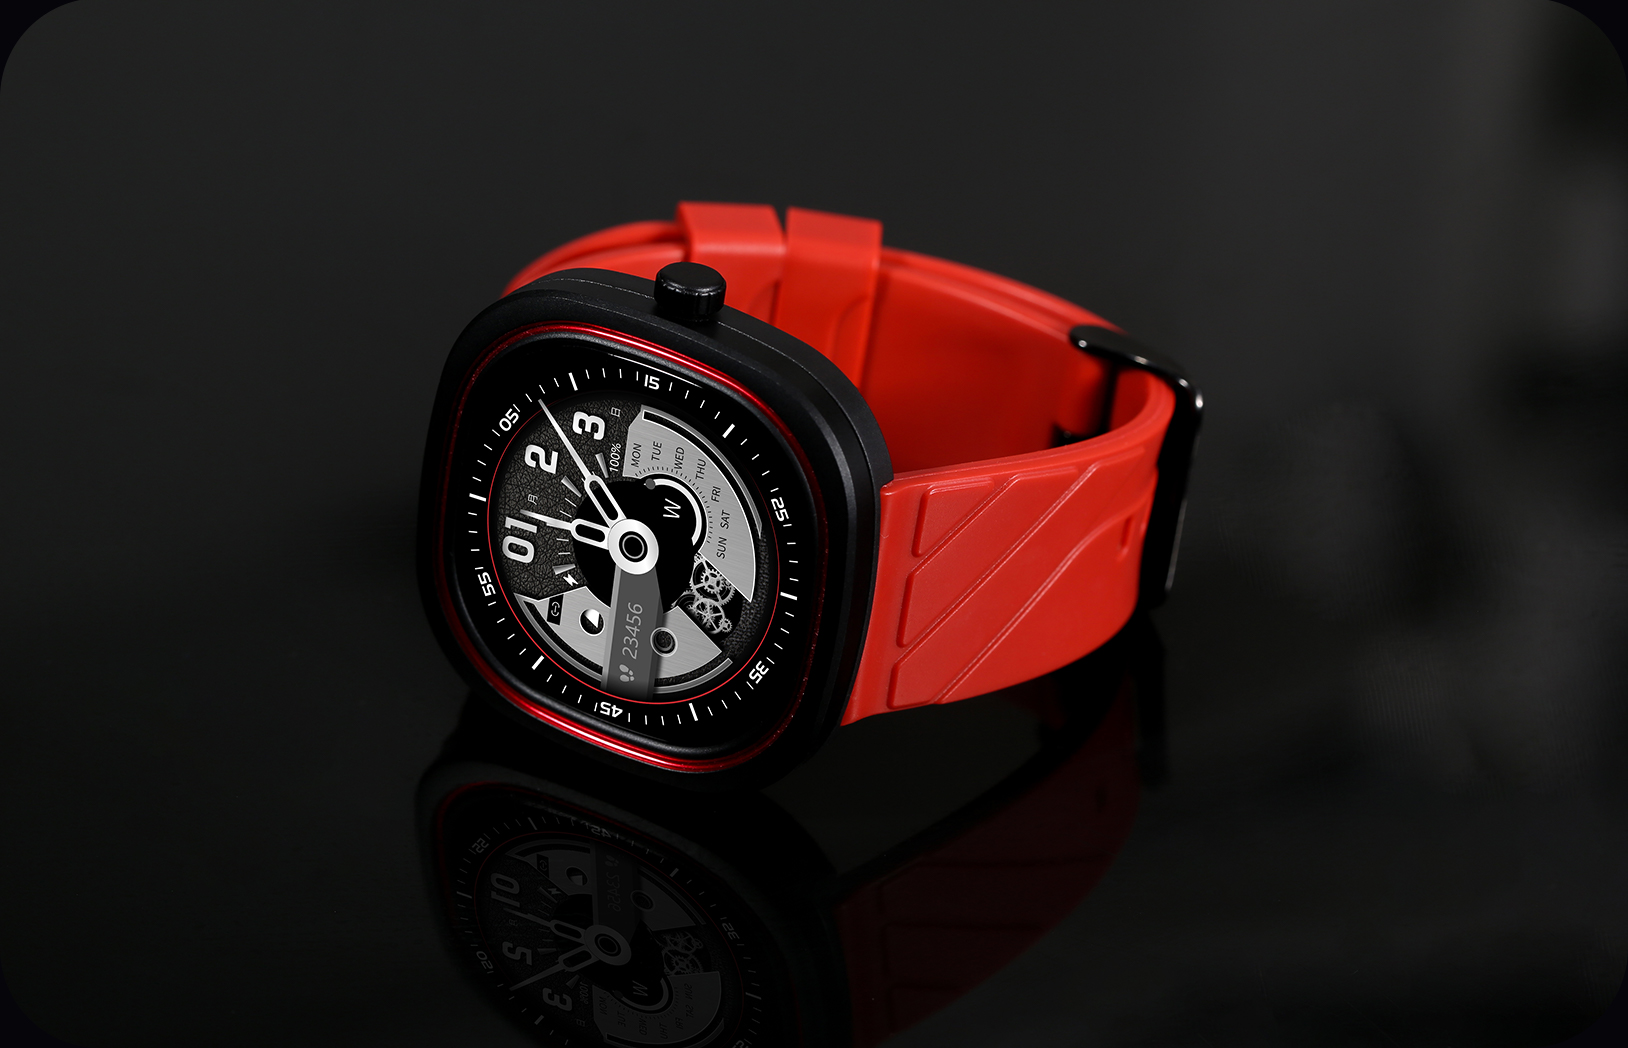  Doogee DG Ares Colors | Red frame and red silica gel strap | Doogee